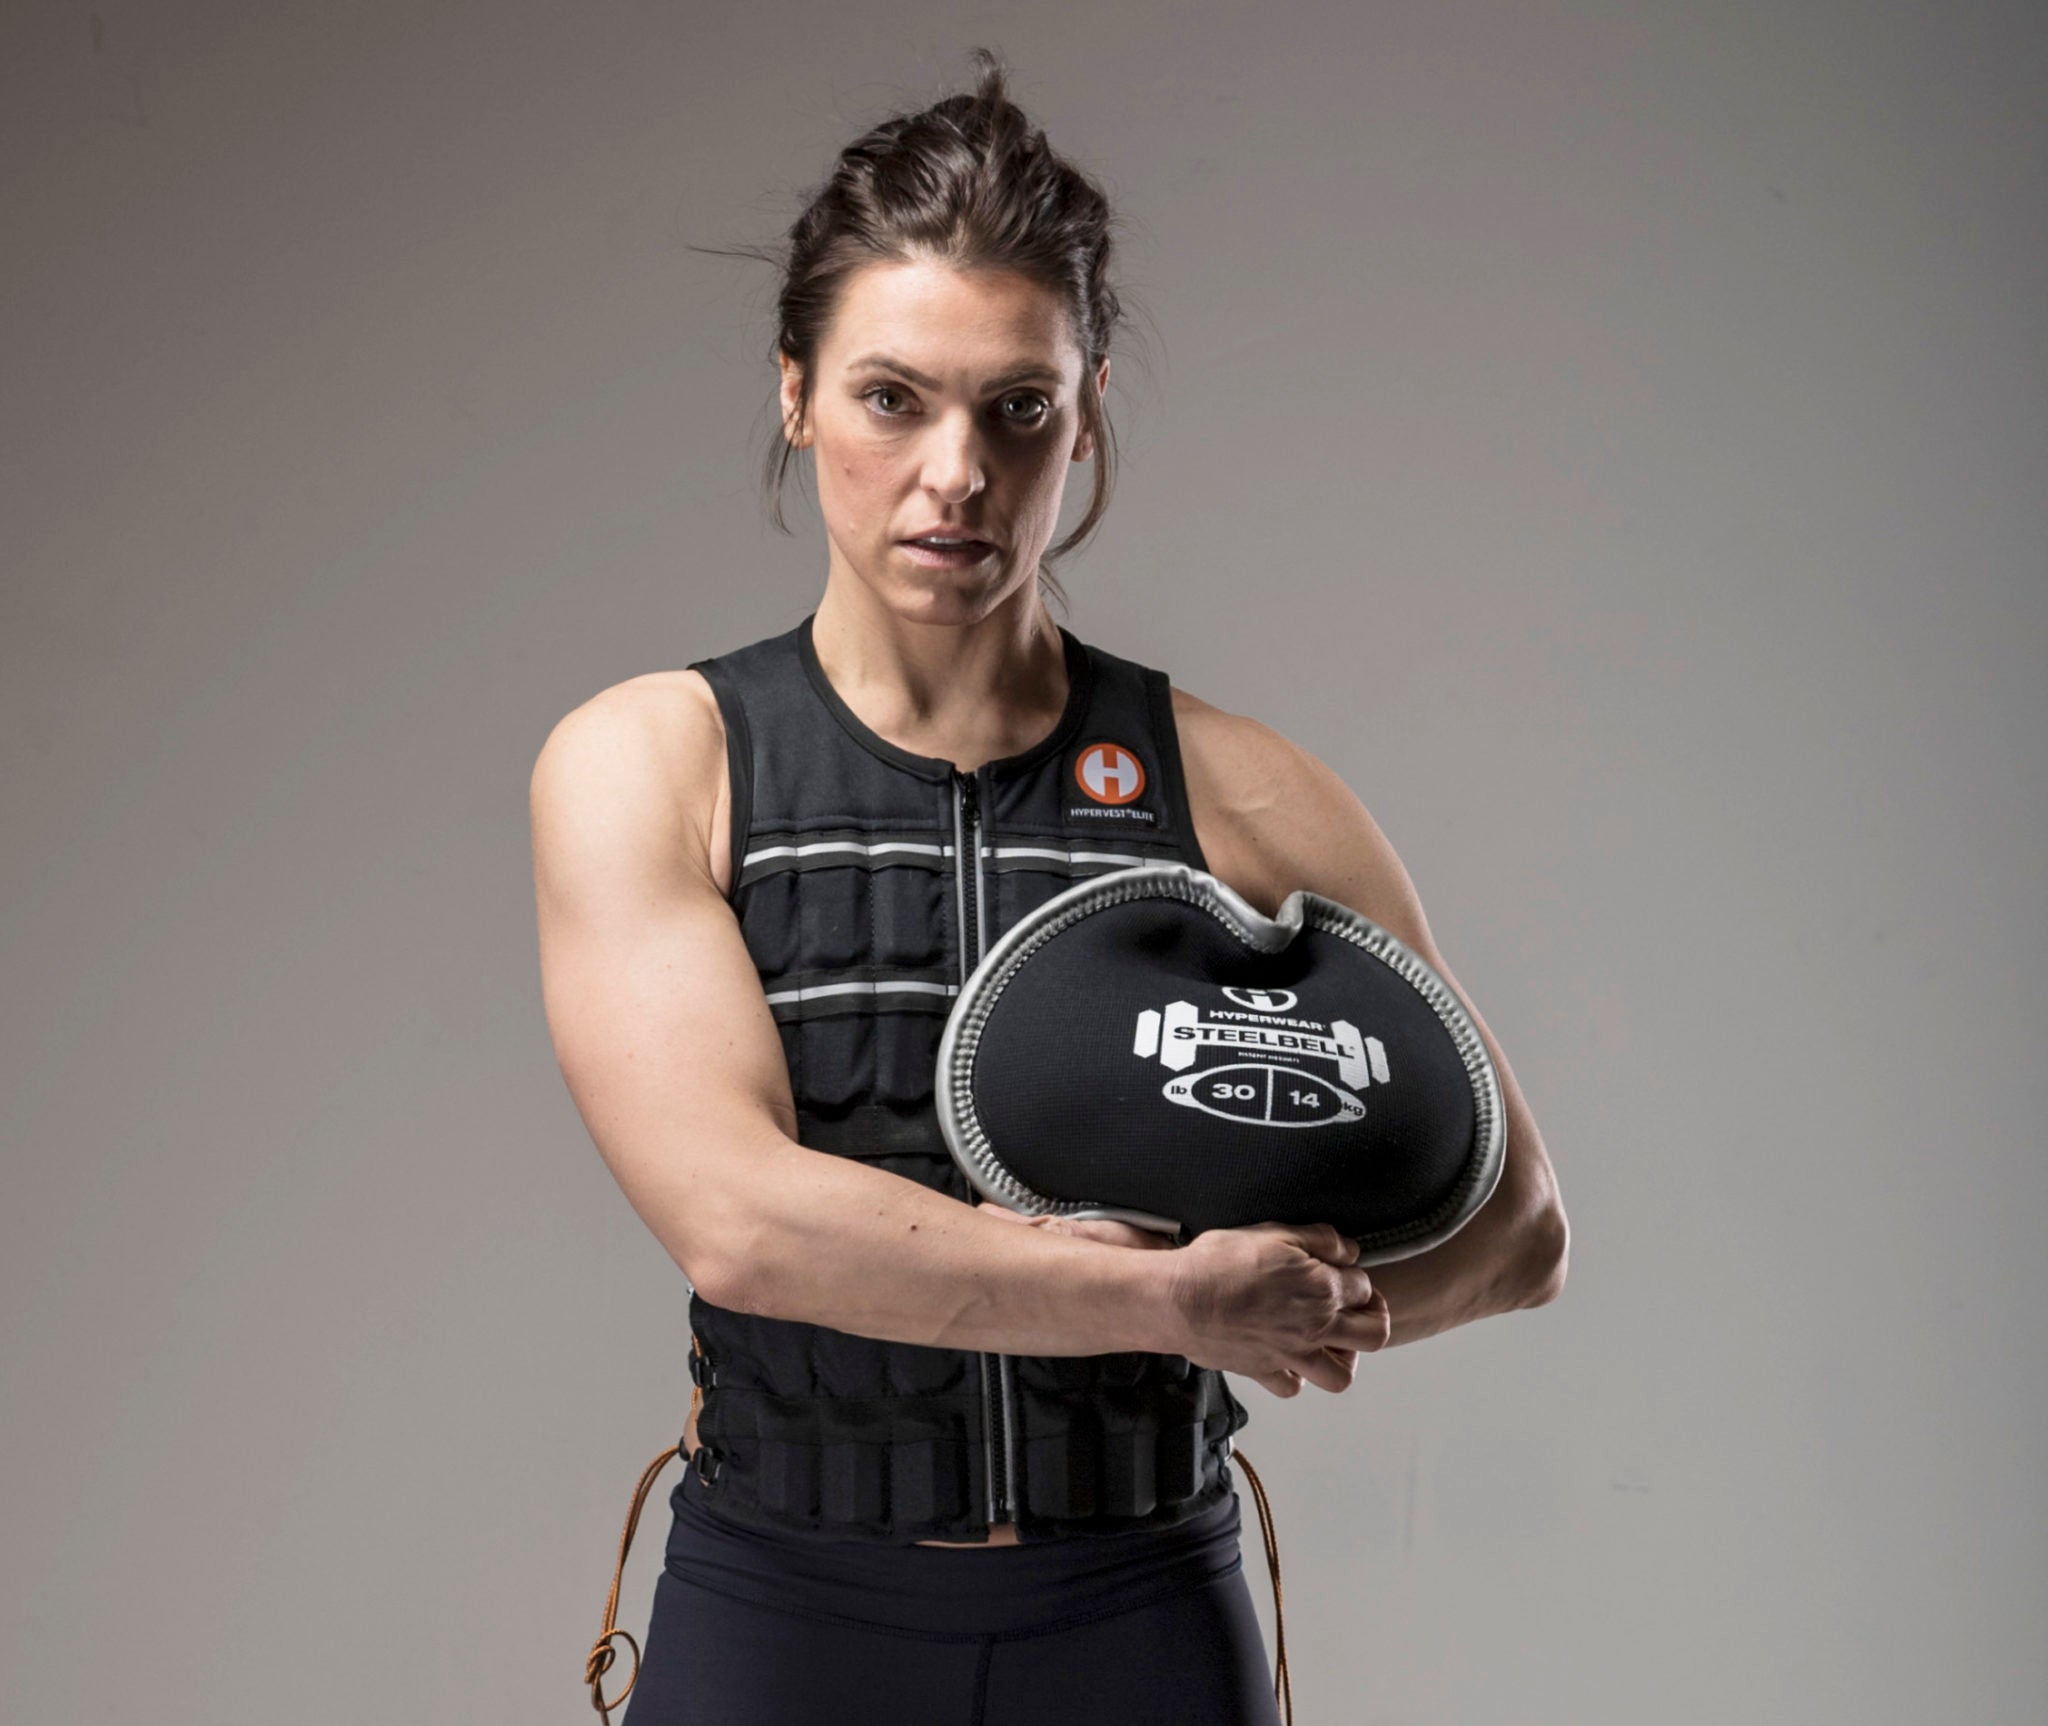 image of female fitness model in a weighted vest holding a SteelBell medicine ball slam alternative free weight